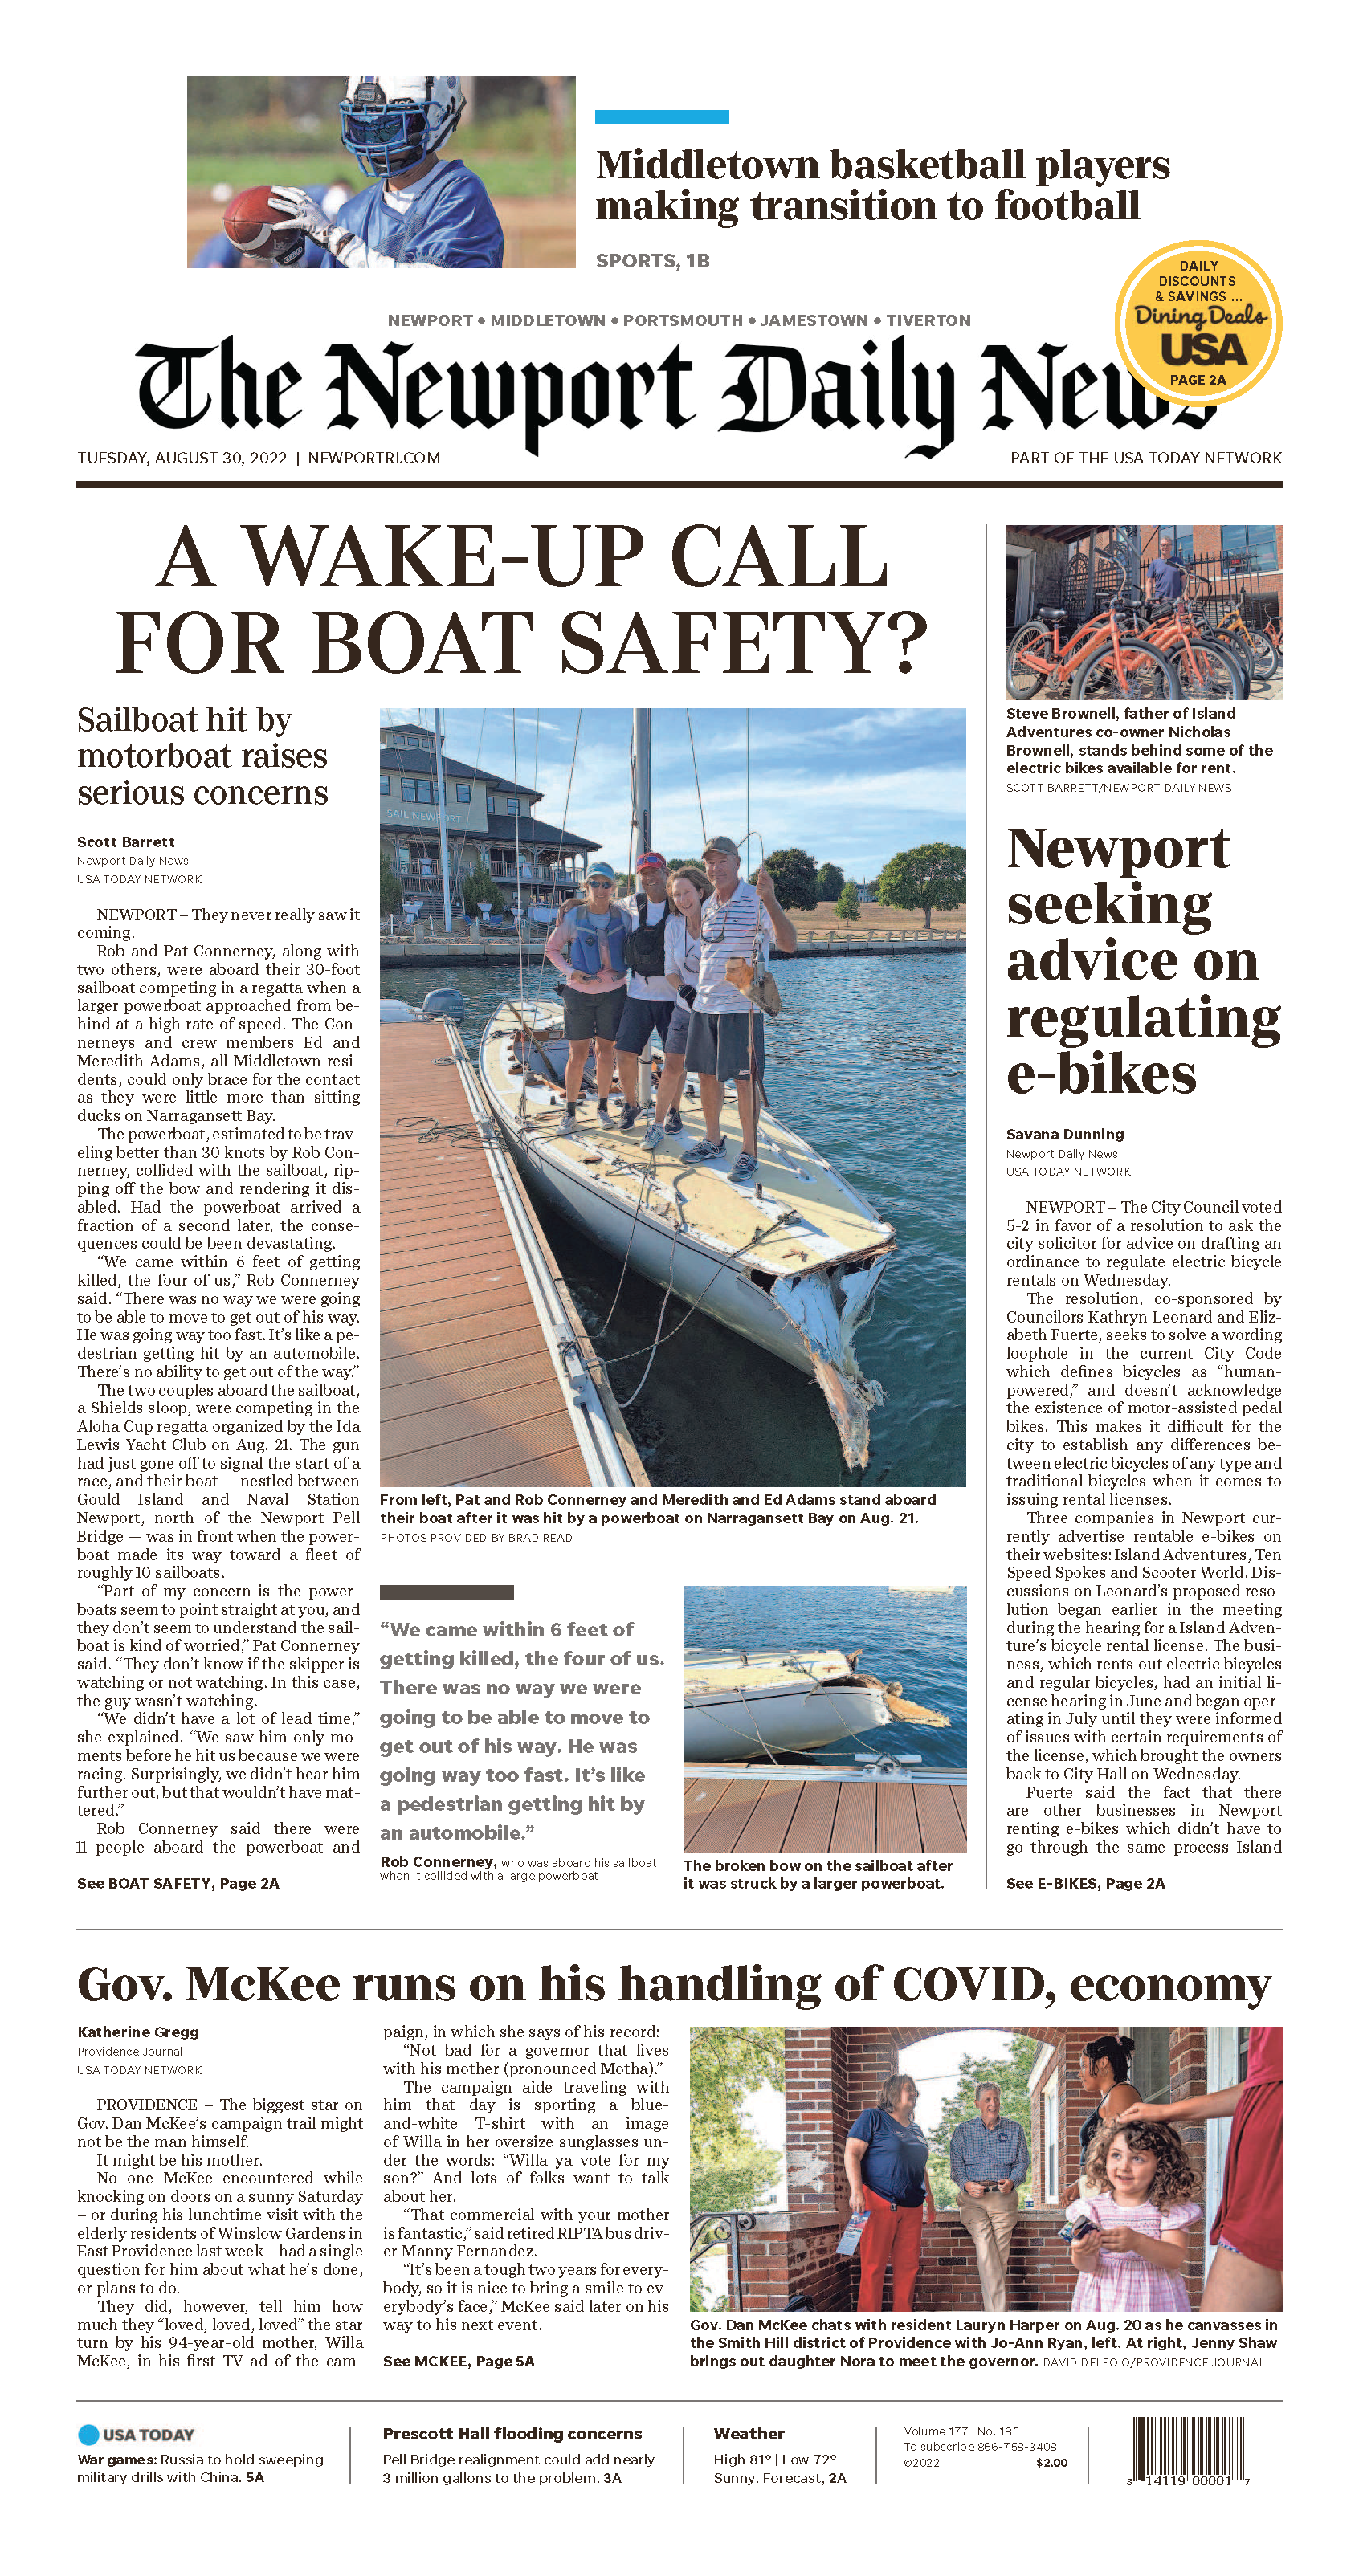 A Wake-up Call For Boat Safety?